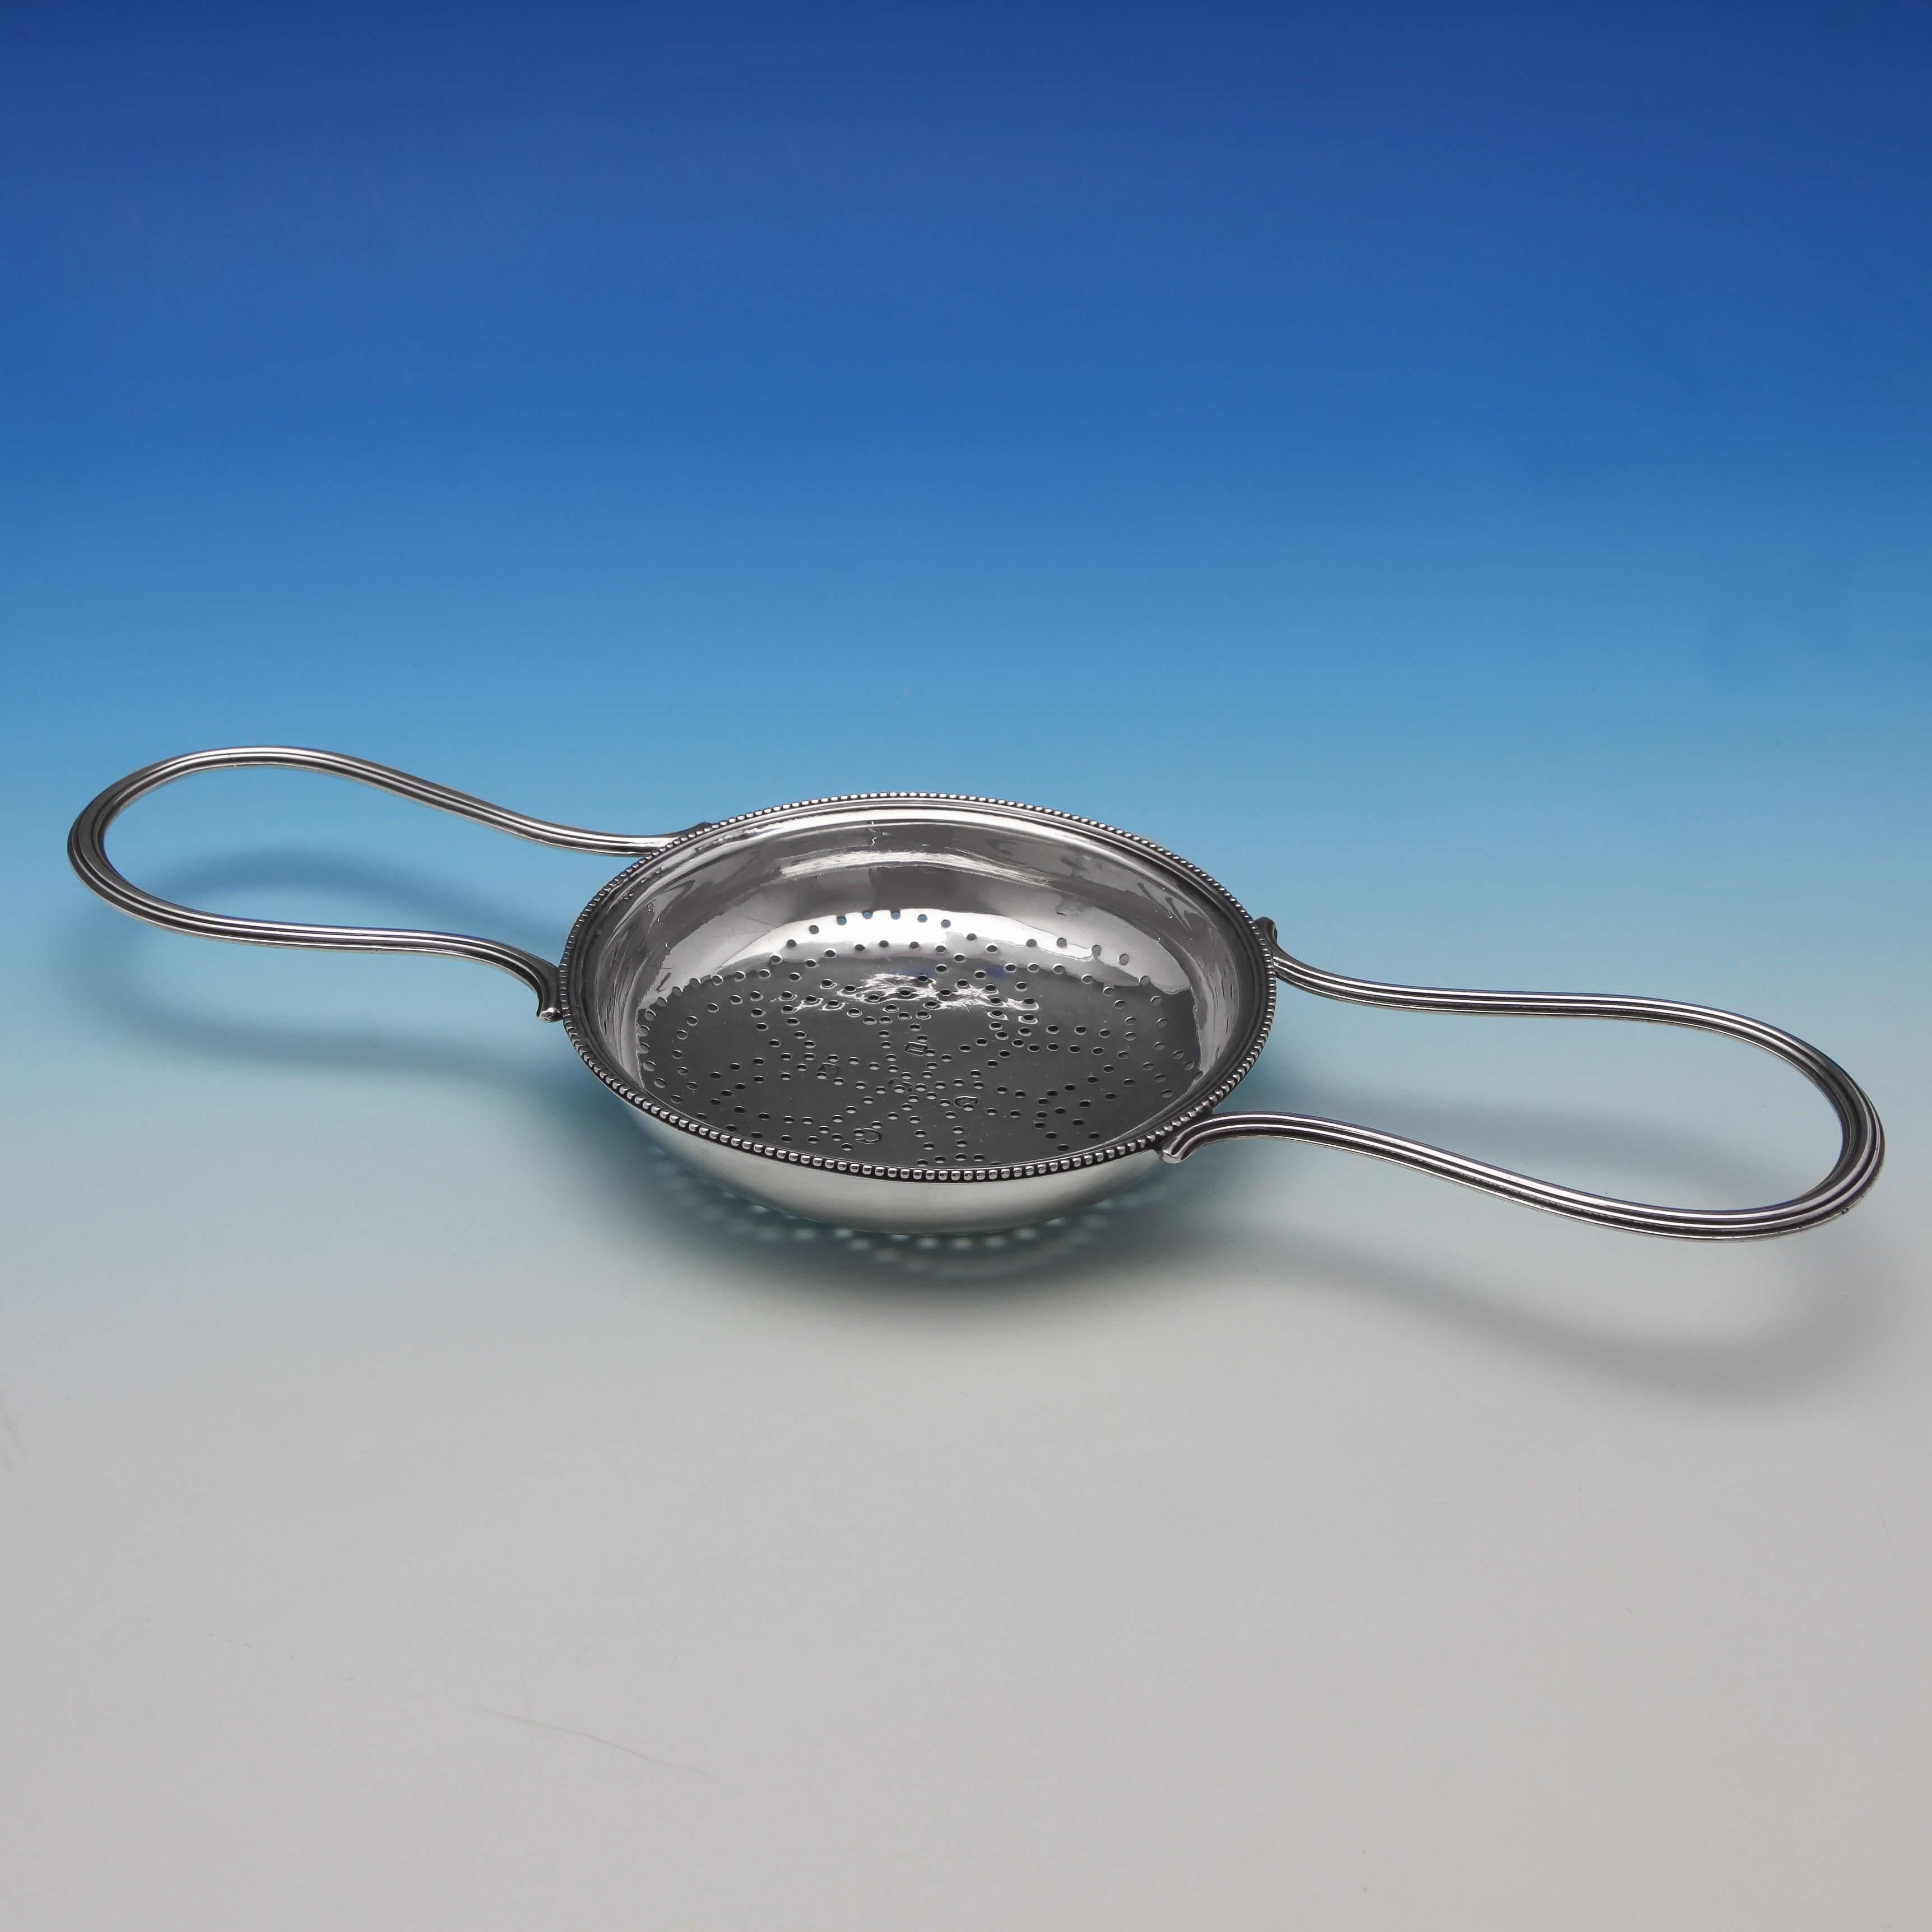 Hallmarked in London in 1786, this lovely antique, George III, sterling silver lemon strainer features daisy pattern piercing, a beaded border, and reeded loop handles. It measures 11